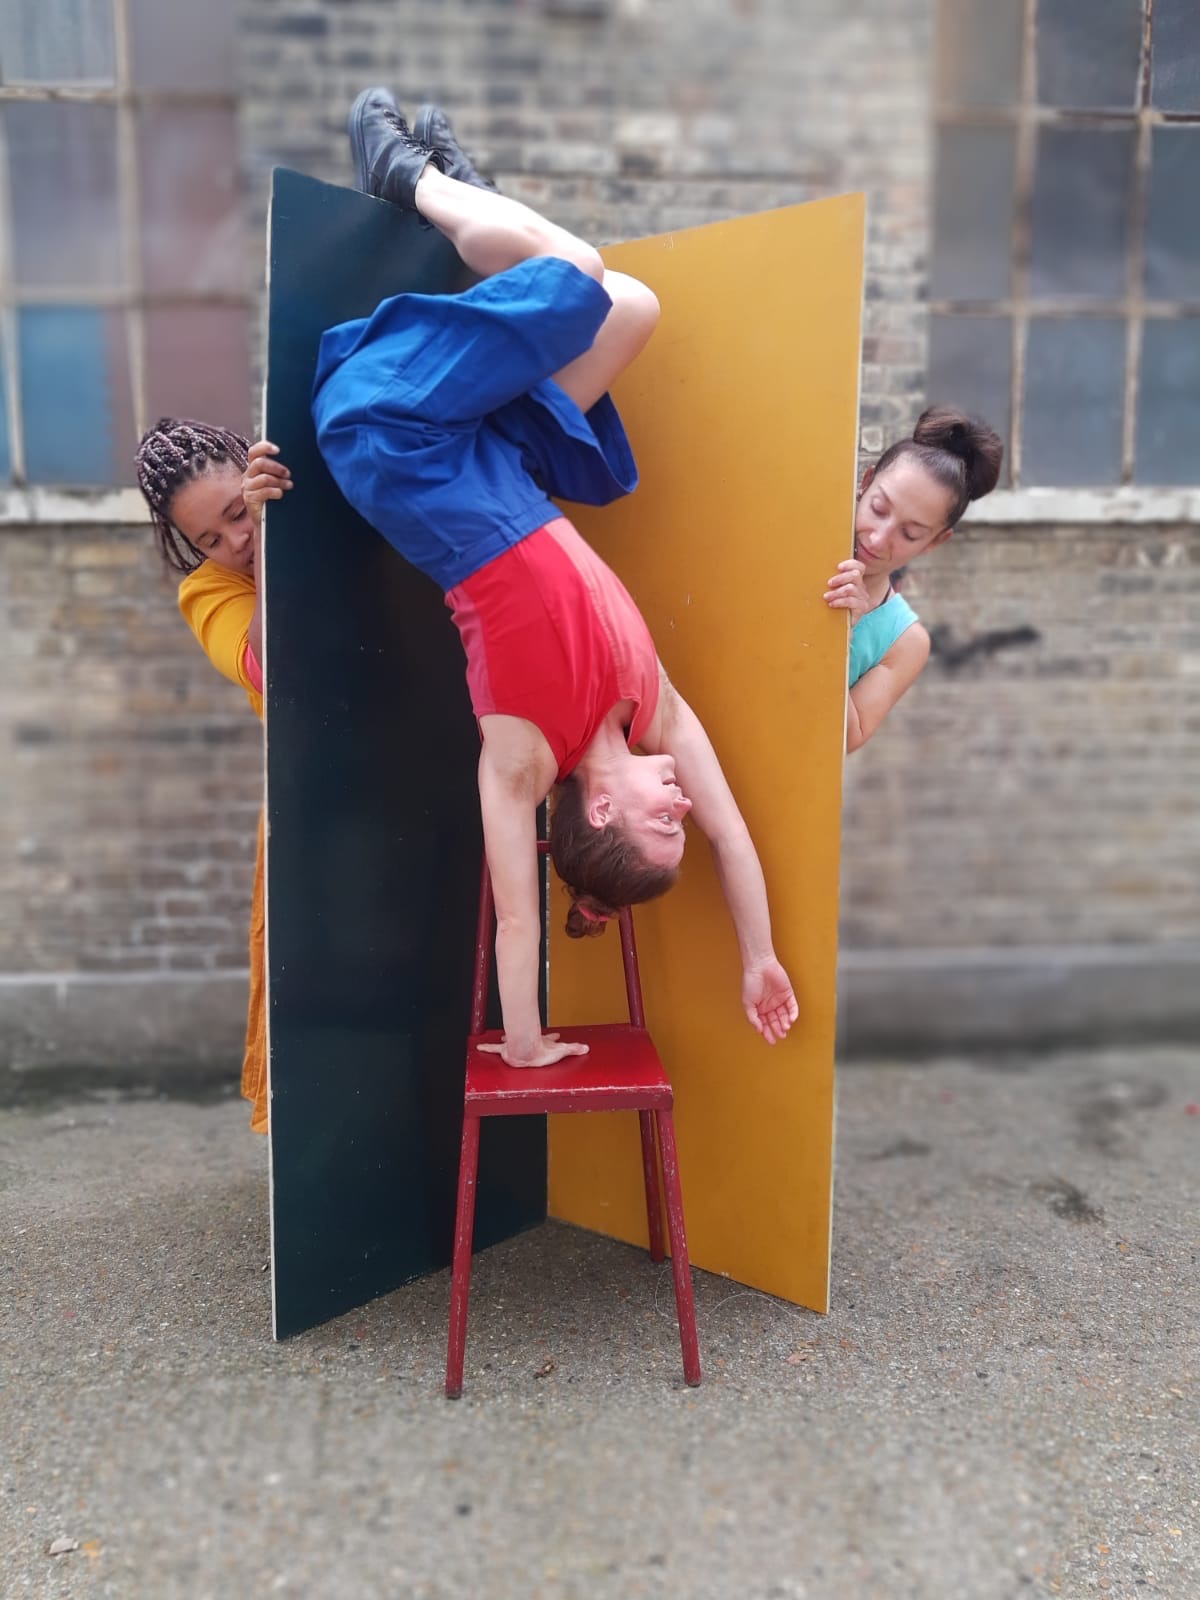 a woman doing a handstand on a chair with two women l=behind her holding up wide planks and looking at the first woman from behind the prop walls.